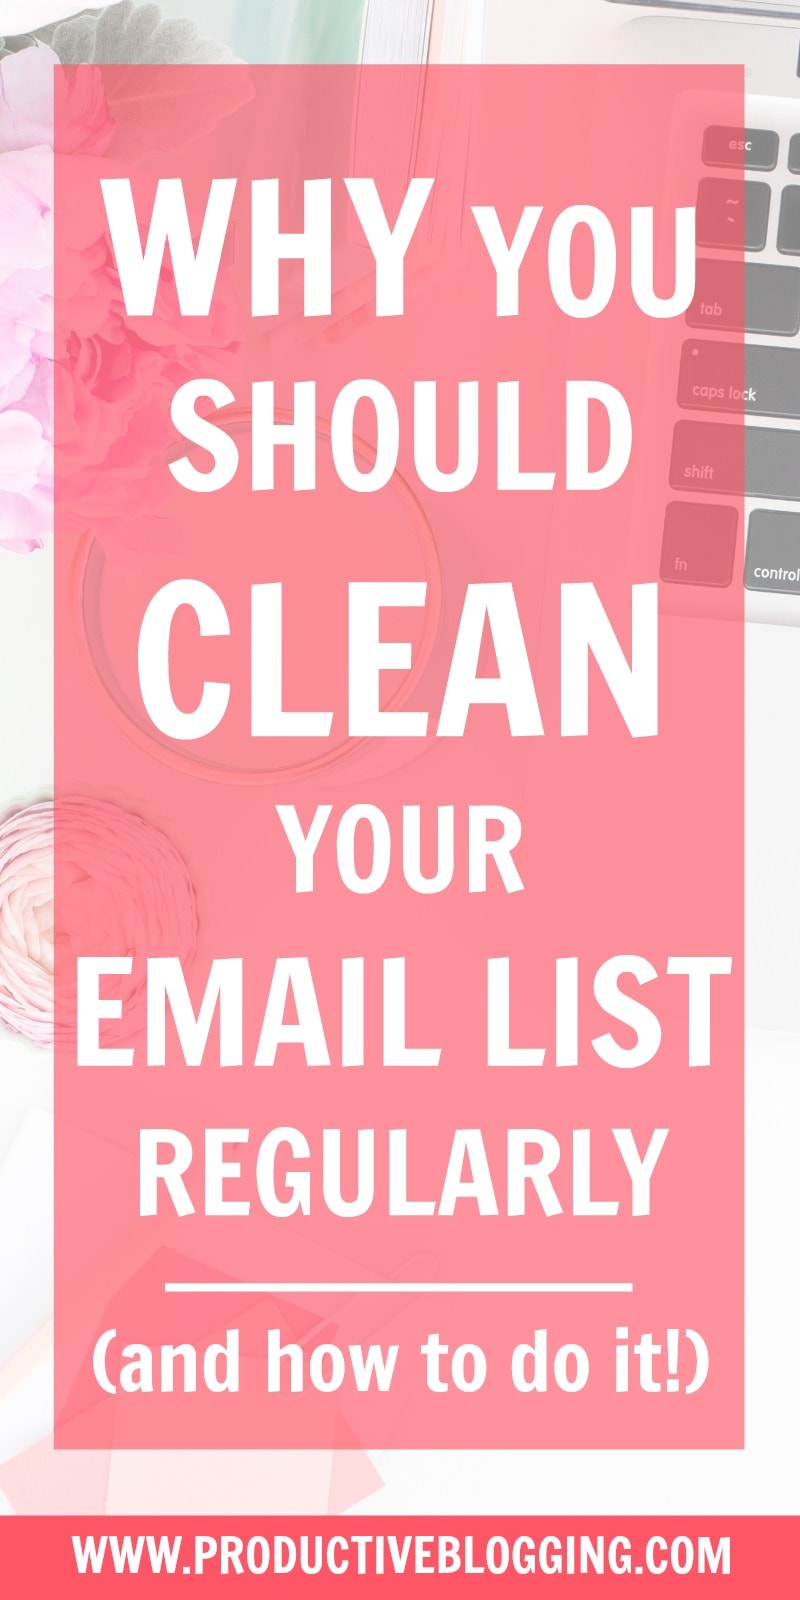 Cleaning your email list improves deliverability, open and click rates, and saves you money! Find out why you should clean your email list regularly and how to do it… #emailmarketing #emaillist #emaillistcleaning #cleanemaillist #convertkit #mailchimp #subscribers #clickrates #openrates #deliverability #spamcomplaints #bouncerate #deletesubscribers #bloggingtips #blogging #bloggers #blogginghacks #productiveblogging